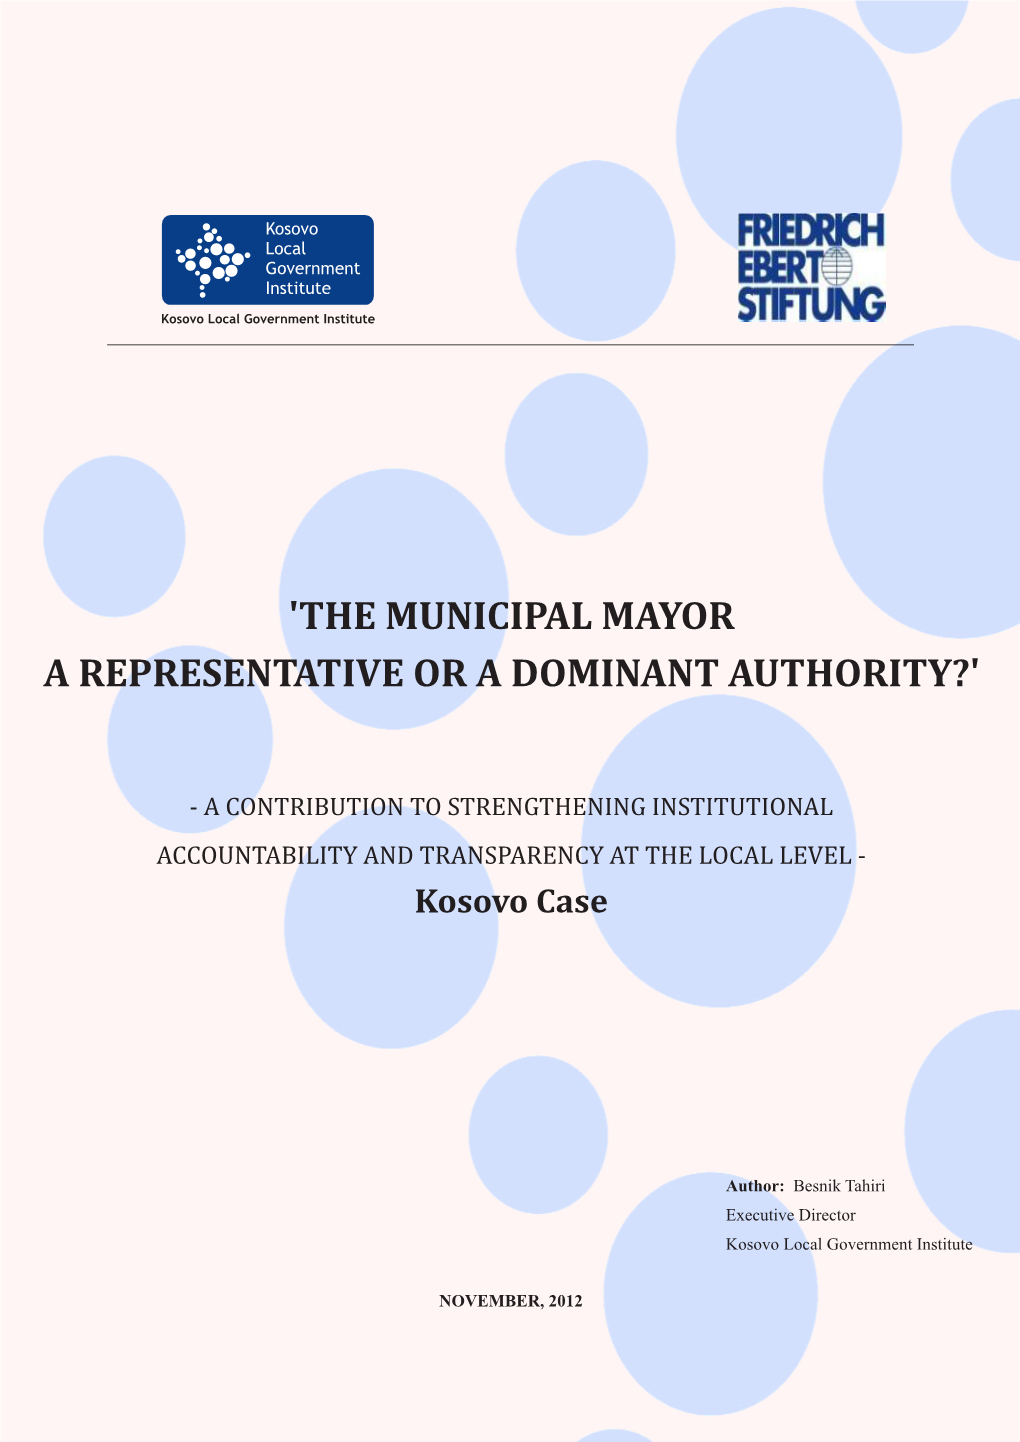 'The Municipal Mayor a Representative Or a Dominant Authority?'